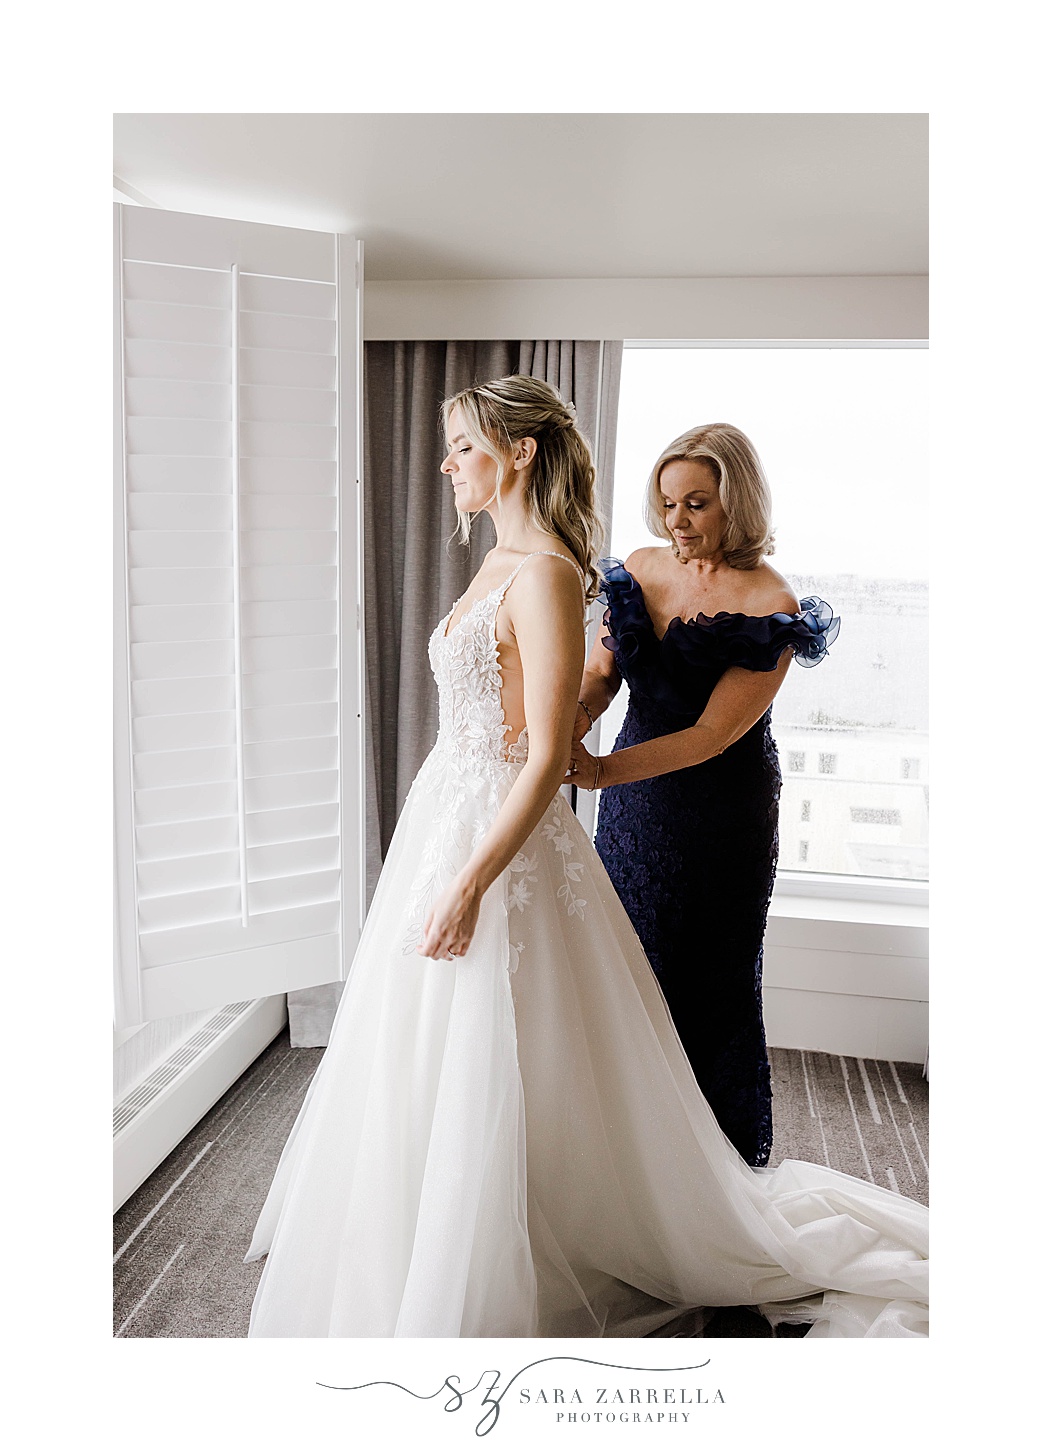 mother in navy gown helps bride into wedding gown